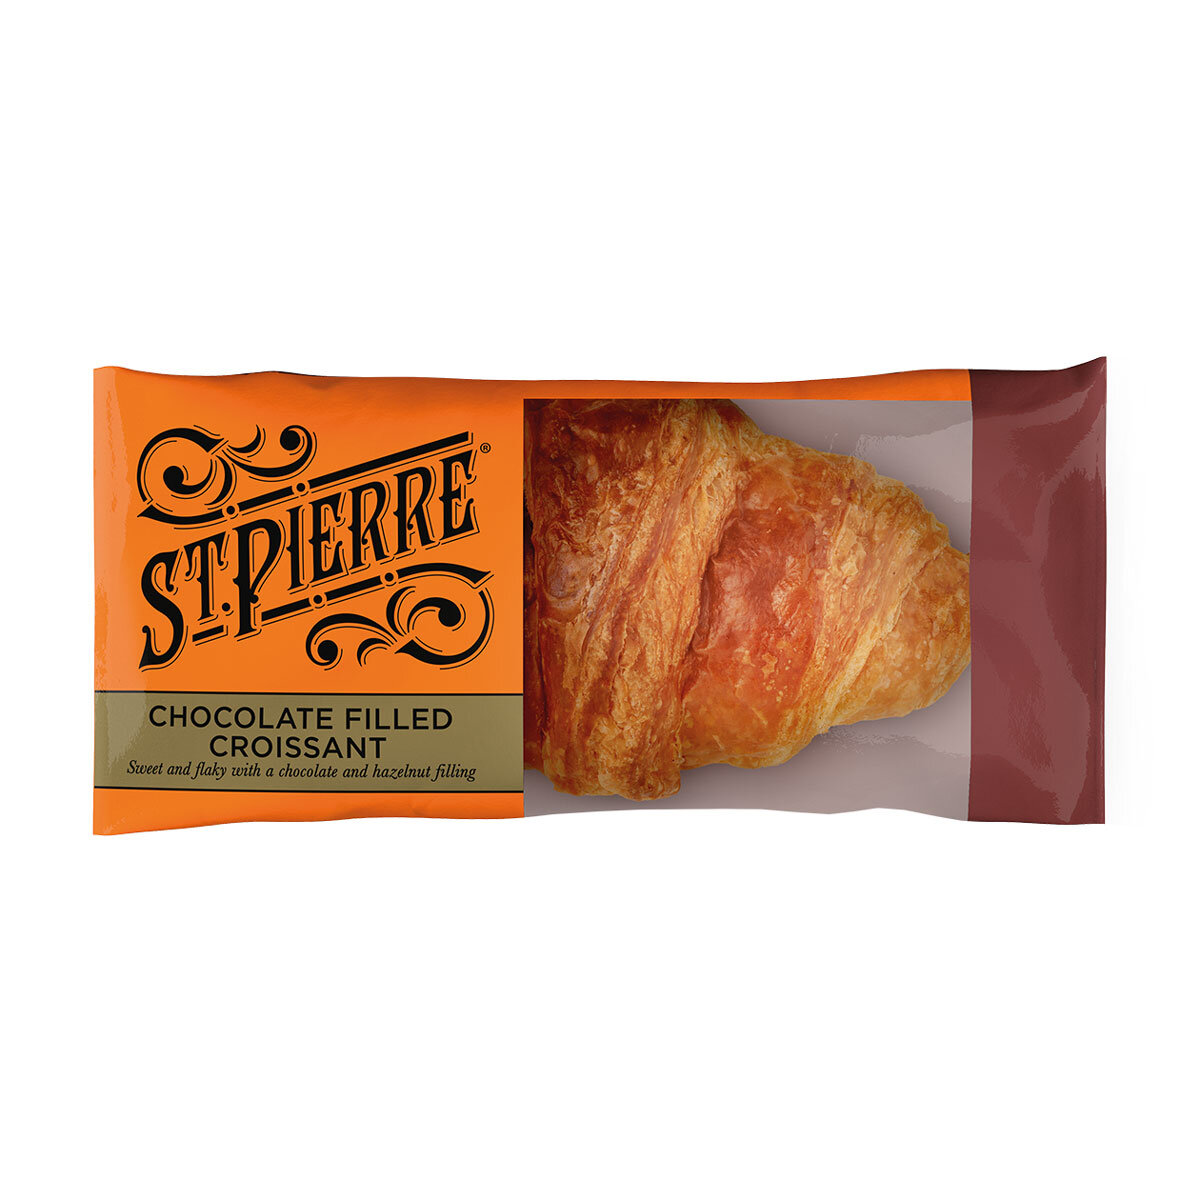 St. Pierre Chocolate Filled Croissant, 16 x 55g Costco UK